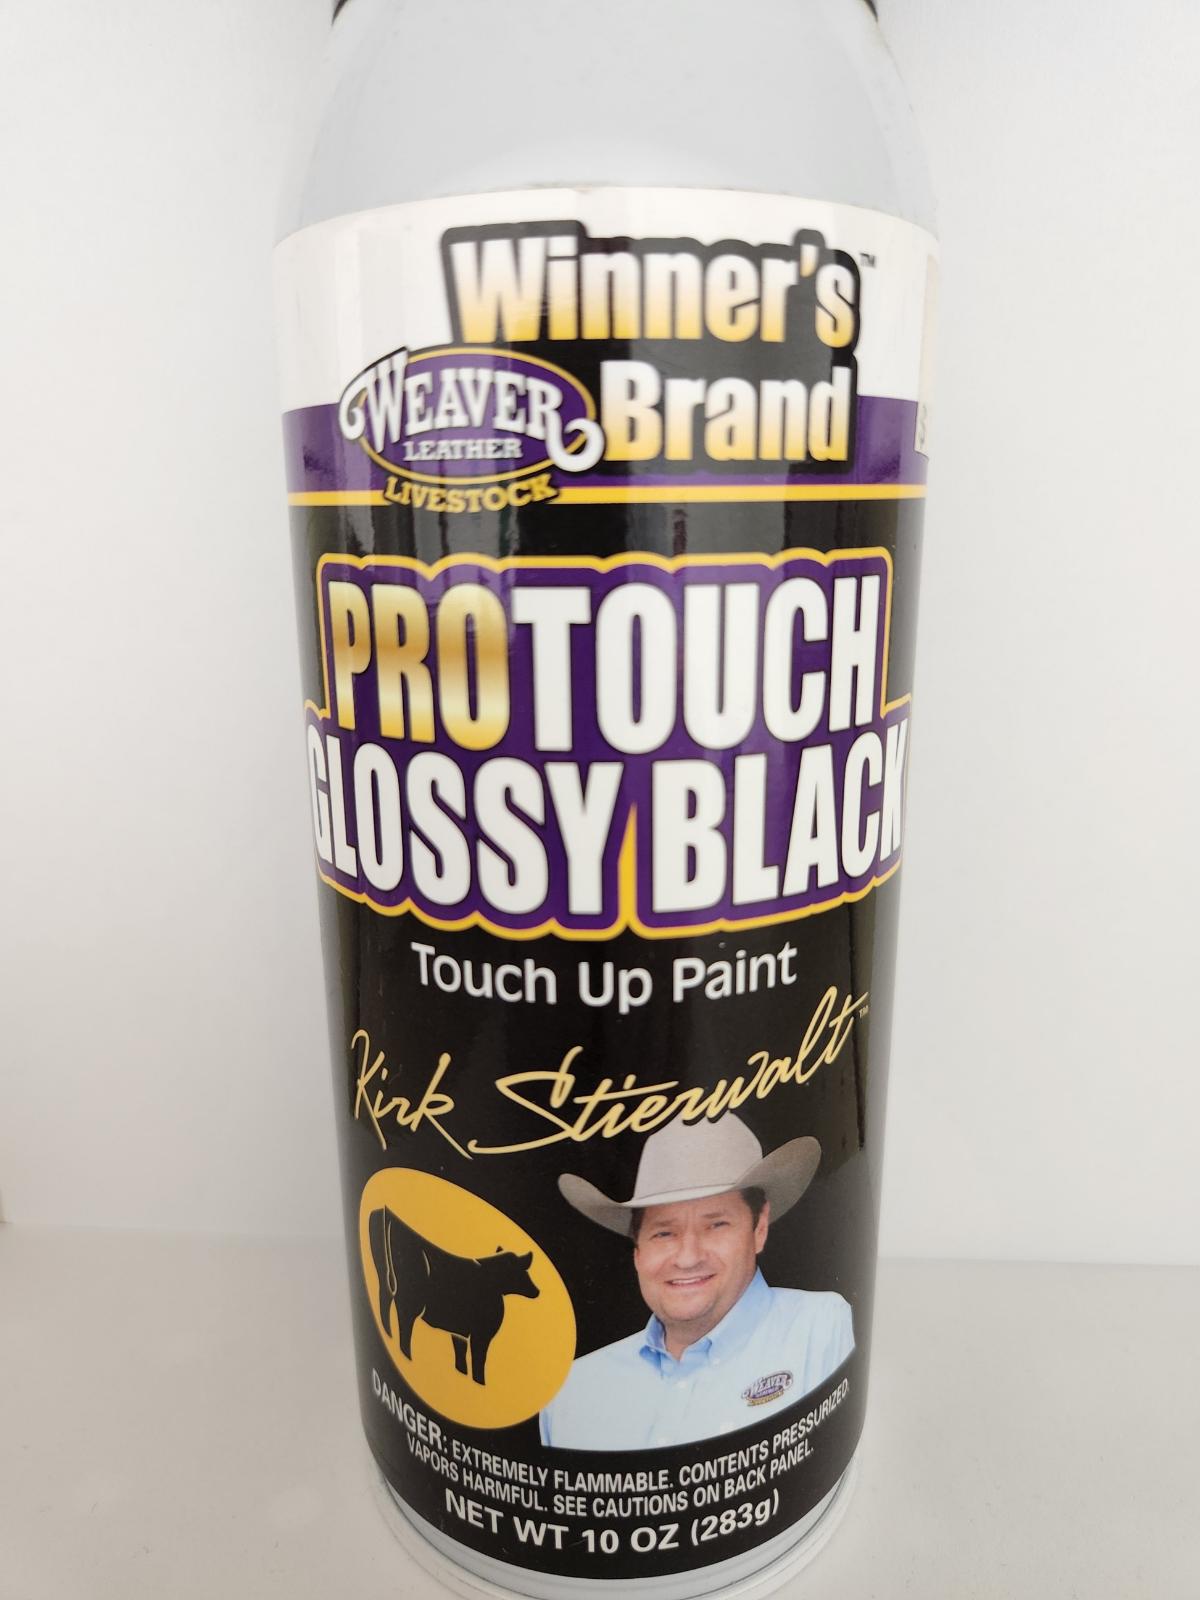 Pro Touch Glossy Black Touch Up Paint - Southern Agriculture